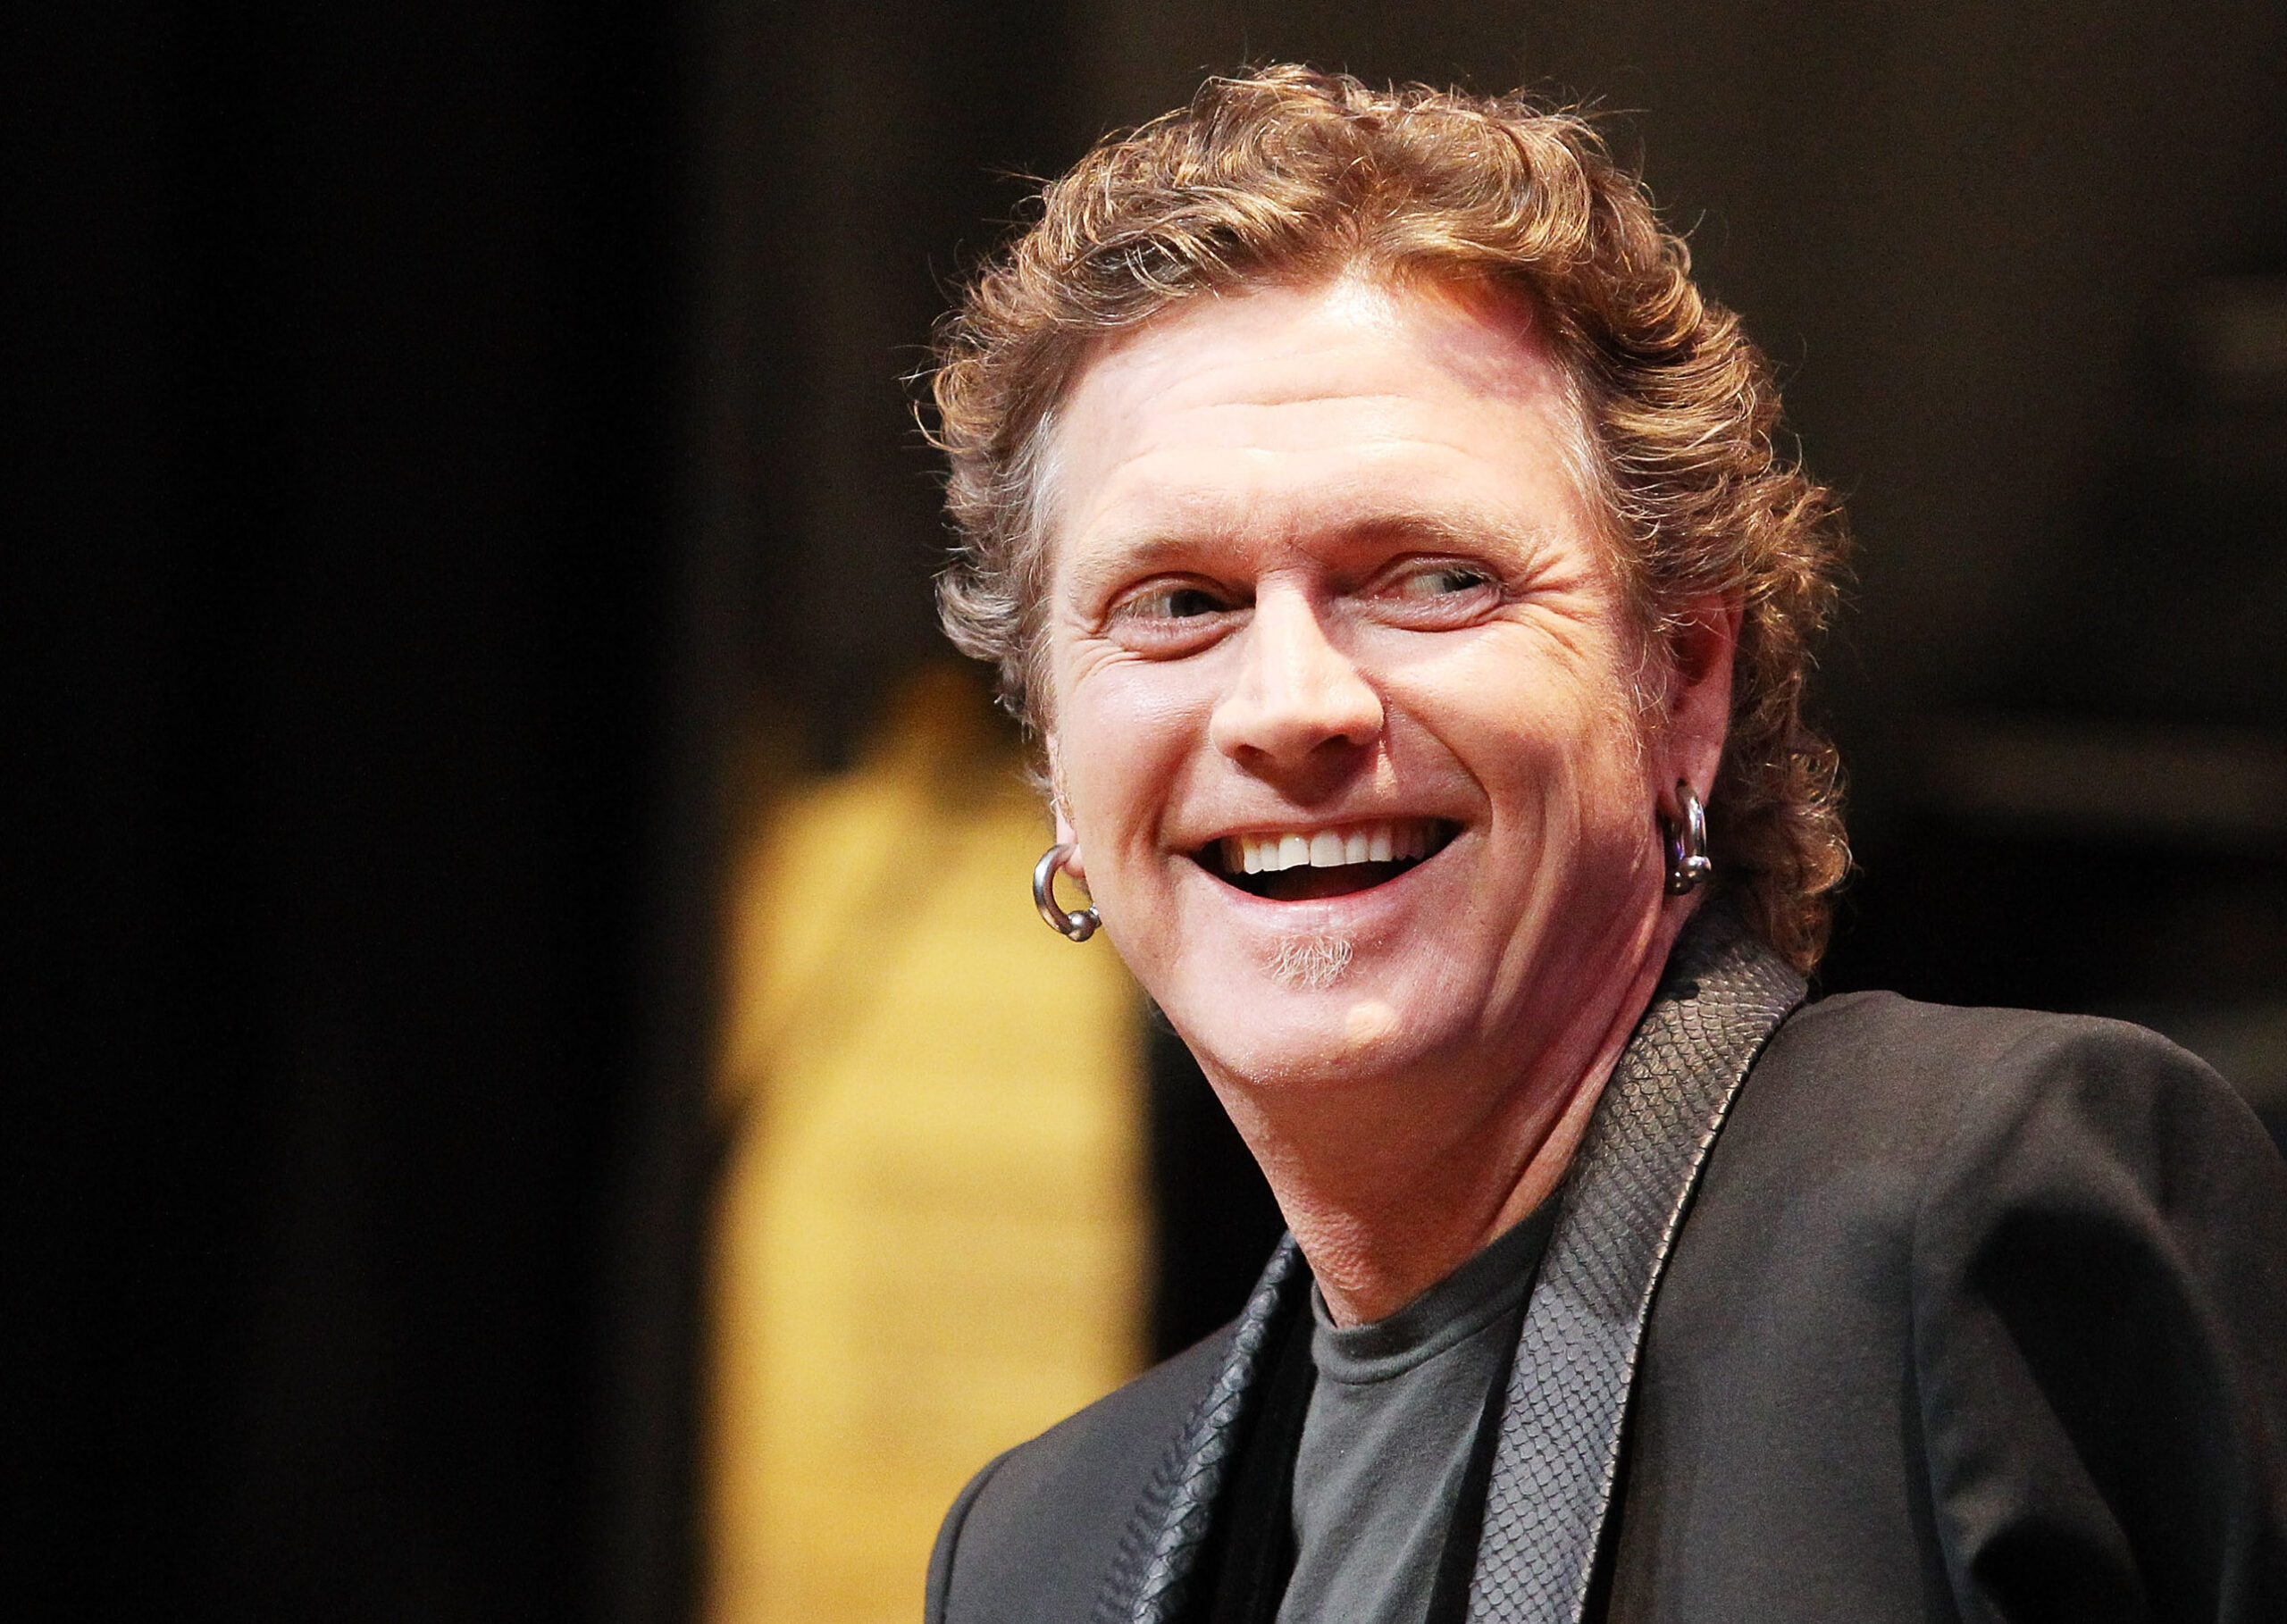 Def Leppard Drummer Rick Allen Attacked By Teenager On Spring Break In Florida, Authorities Say